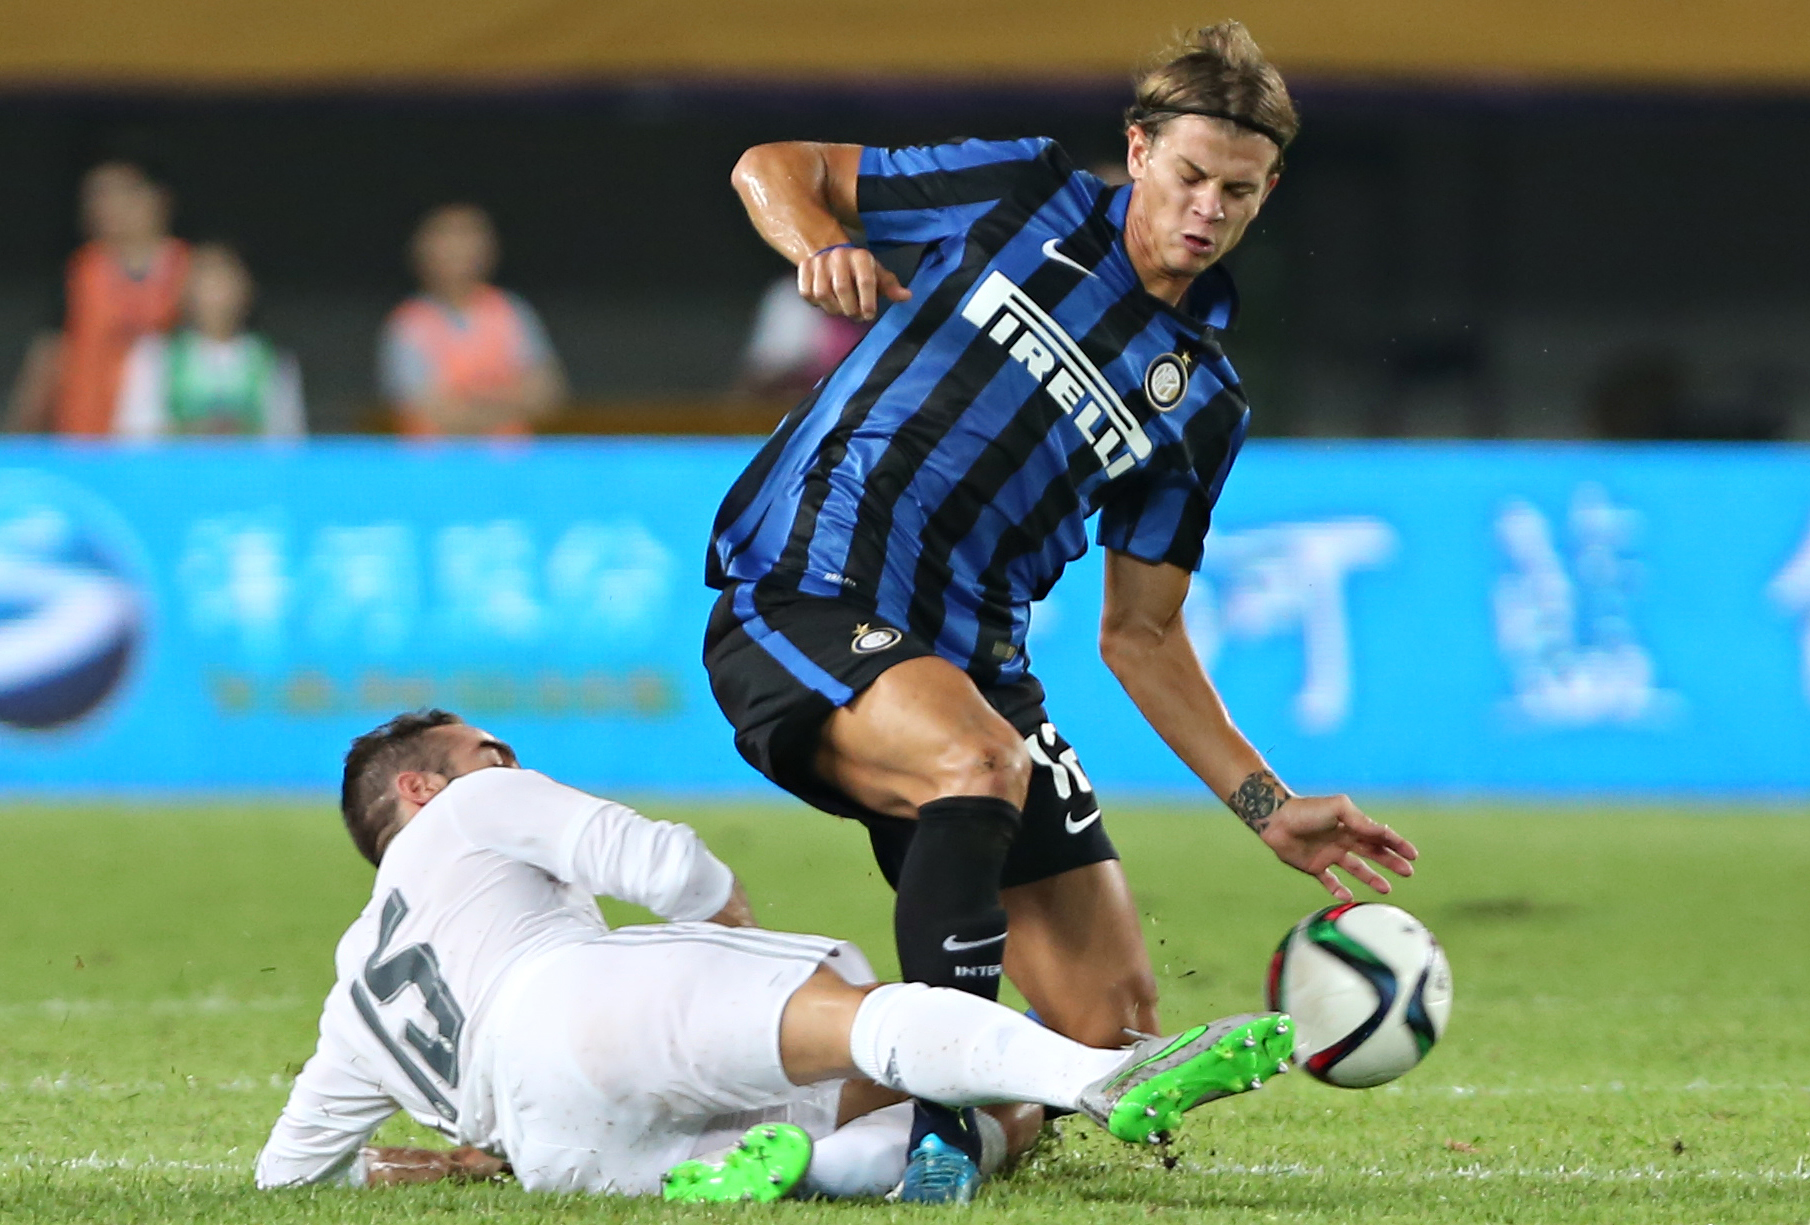 FCIM: Longo in form with Girona – His future is in the hands of the Catalan club